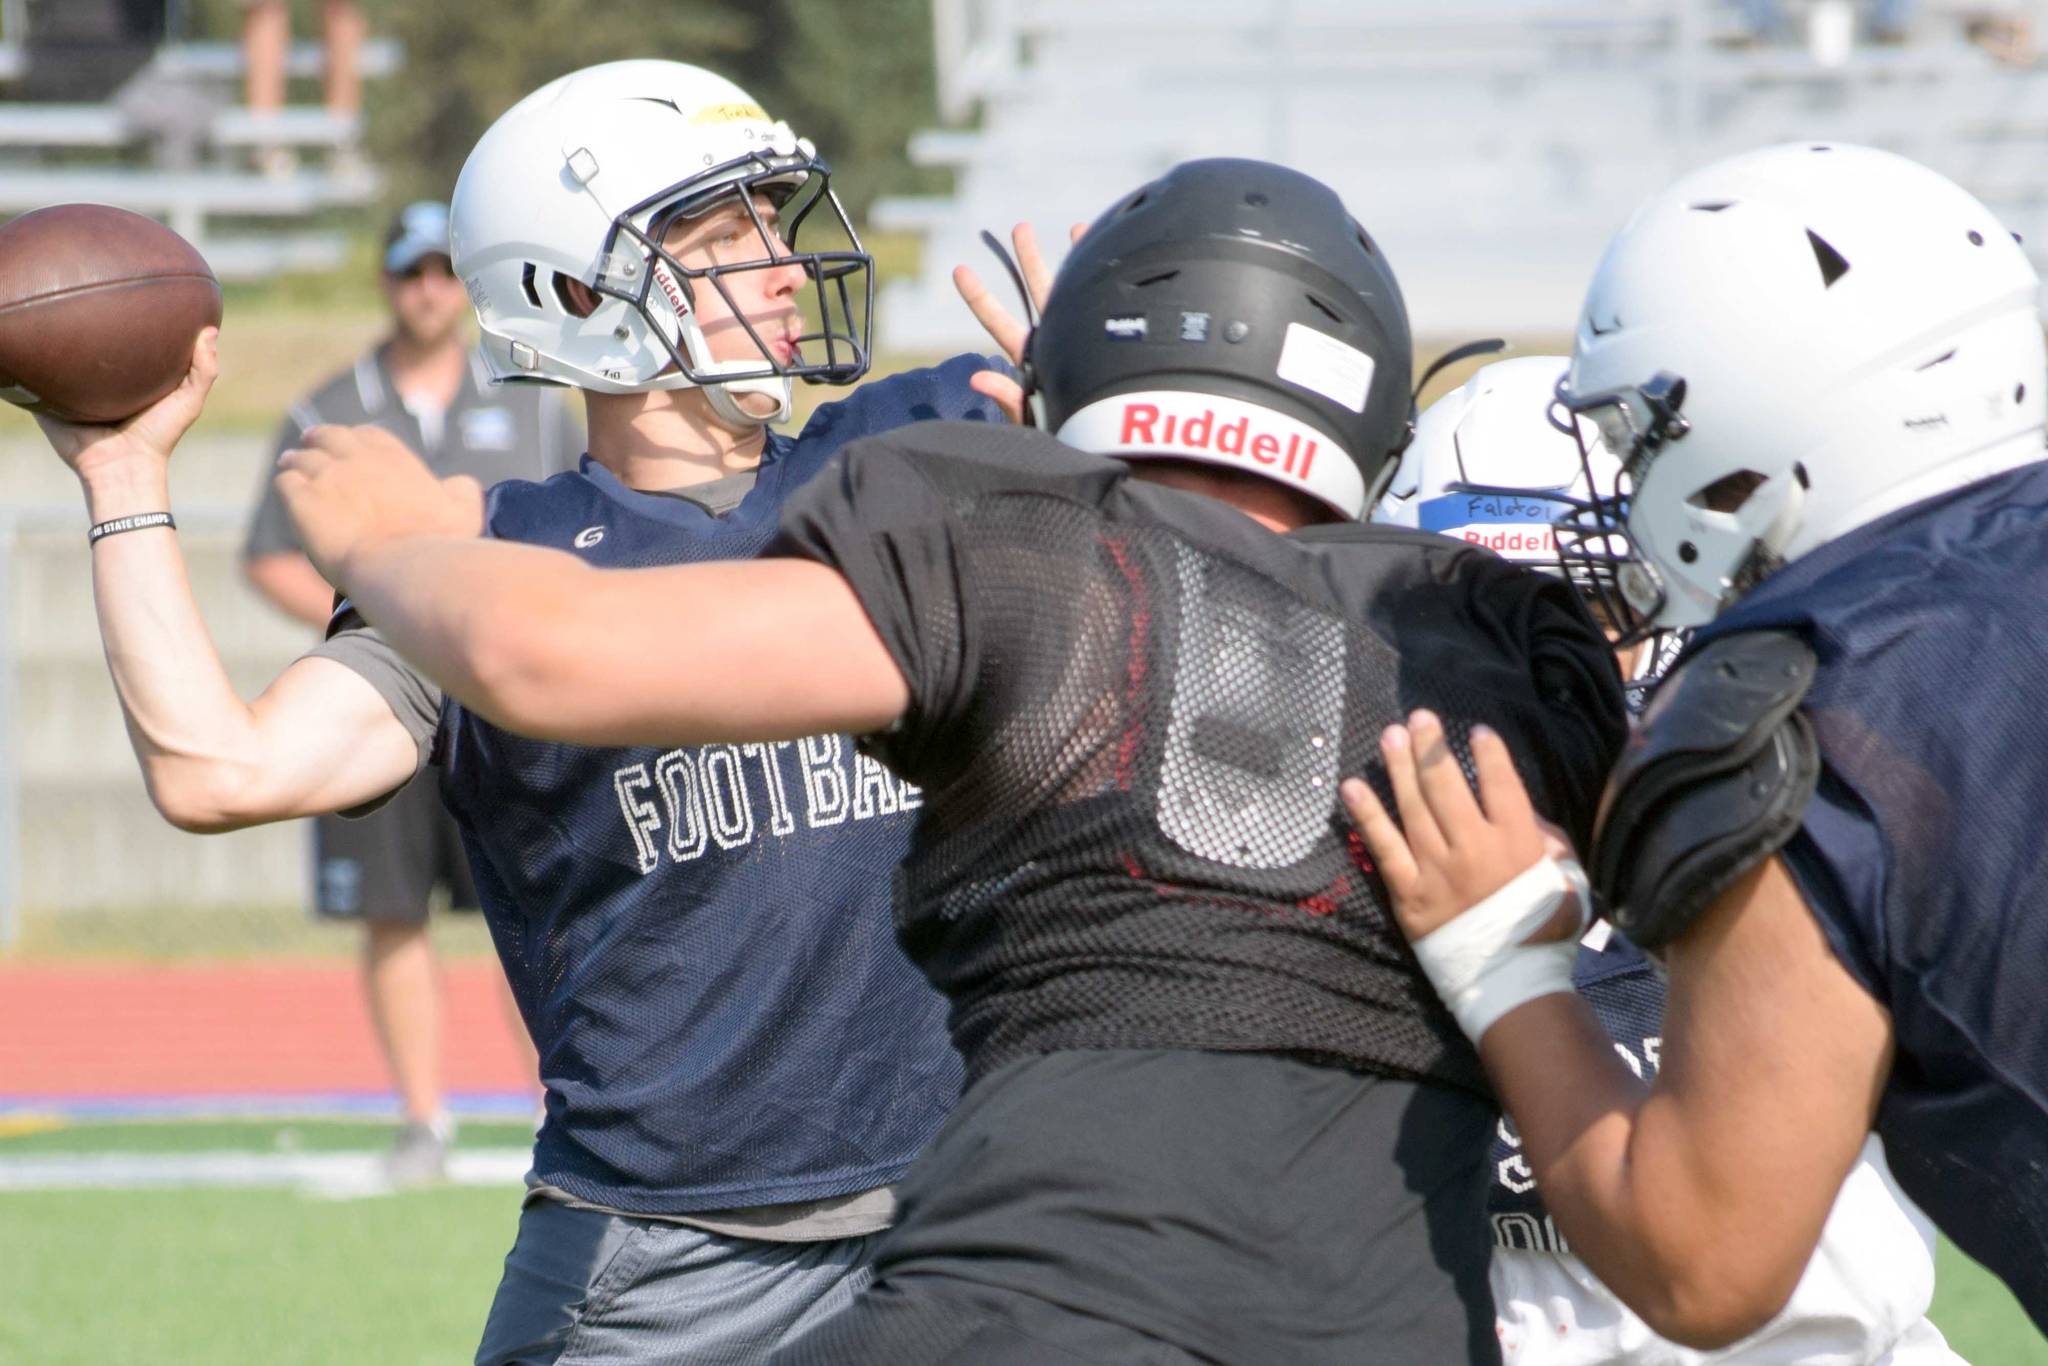 Soldotna’s Jersey Truesdell prepares to loft a pass in a scrimmage against Chugiak on Saturday, Aug. 10, 2019, at Justin Maile Field in Soldotna, Alaska. (Photo by Jeff Helminiak/Peninsula Clarion)